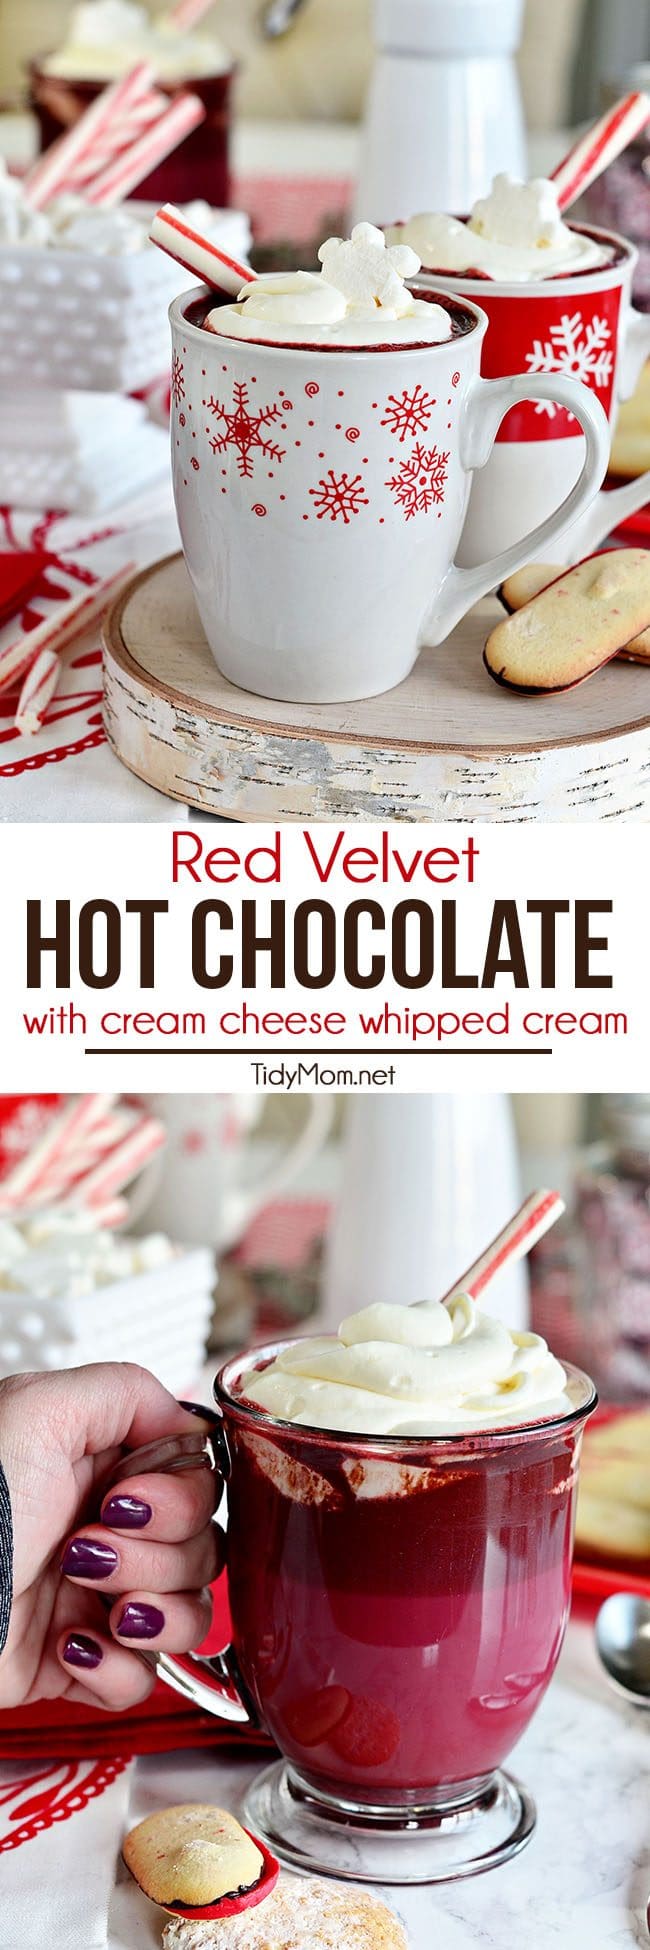 Red Velvet Hot Chocolate with Cream Cheese Whipped Cream photo collage